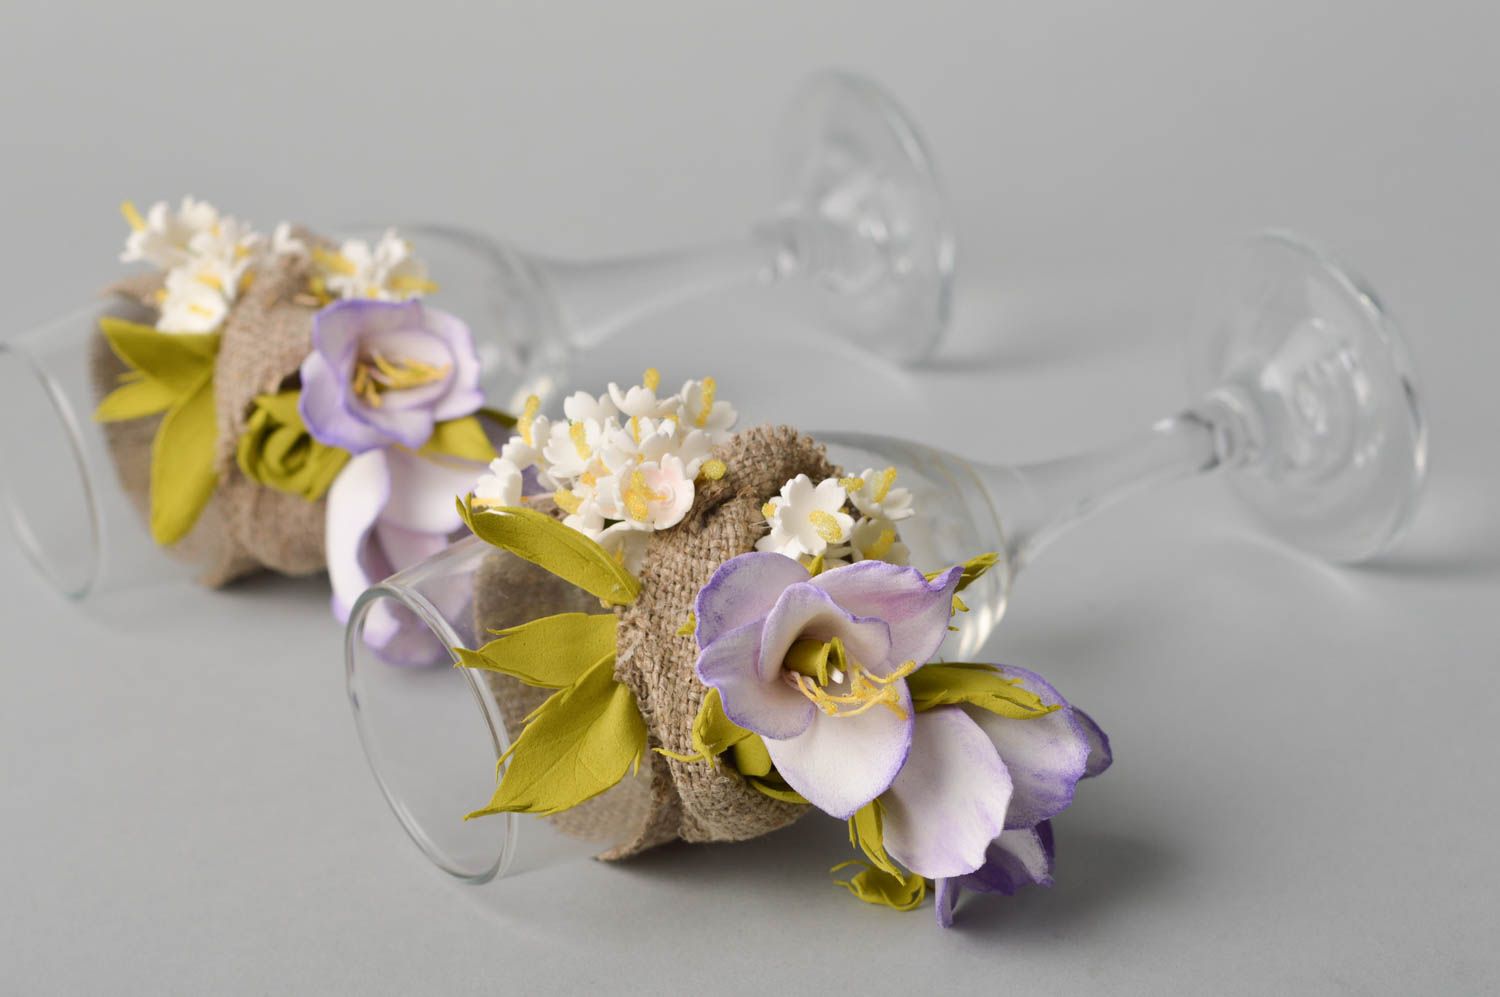 Handmade wedding glasses with flowers unusual glasses for newlyweds gift ideas photo 4